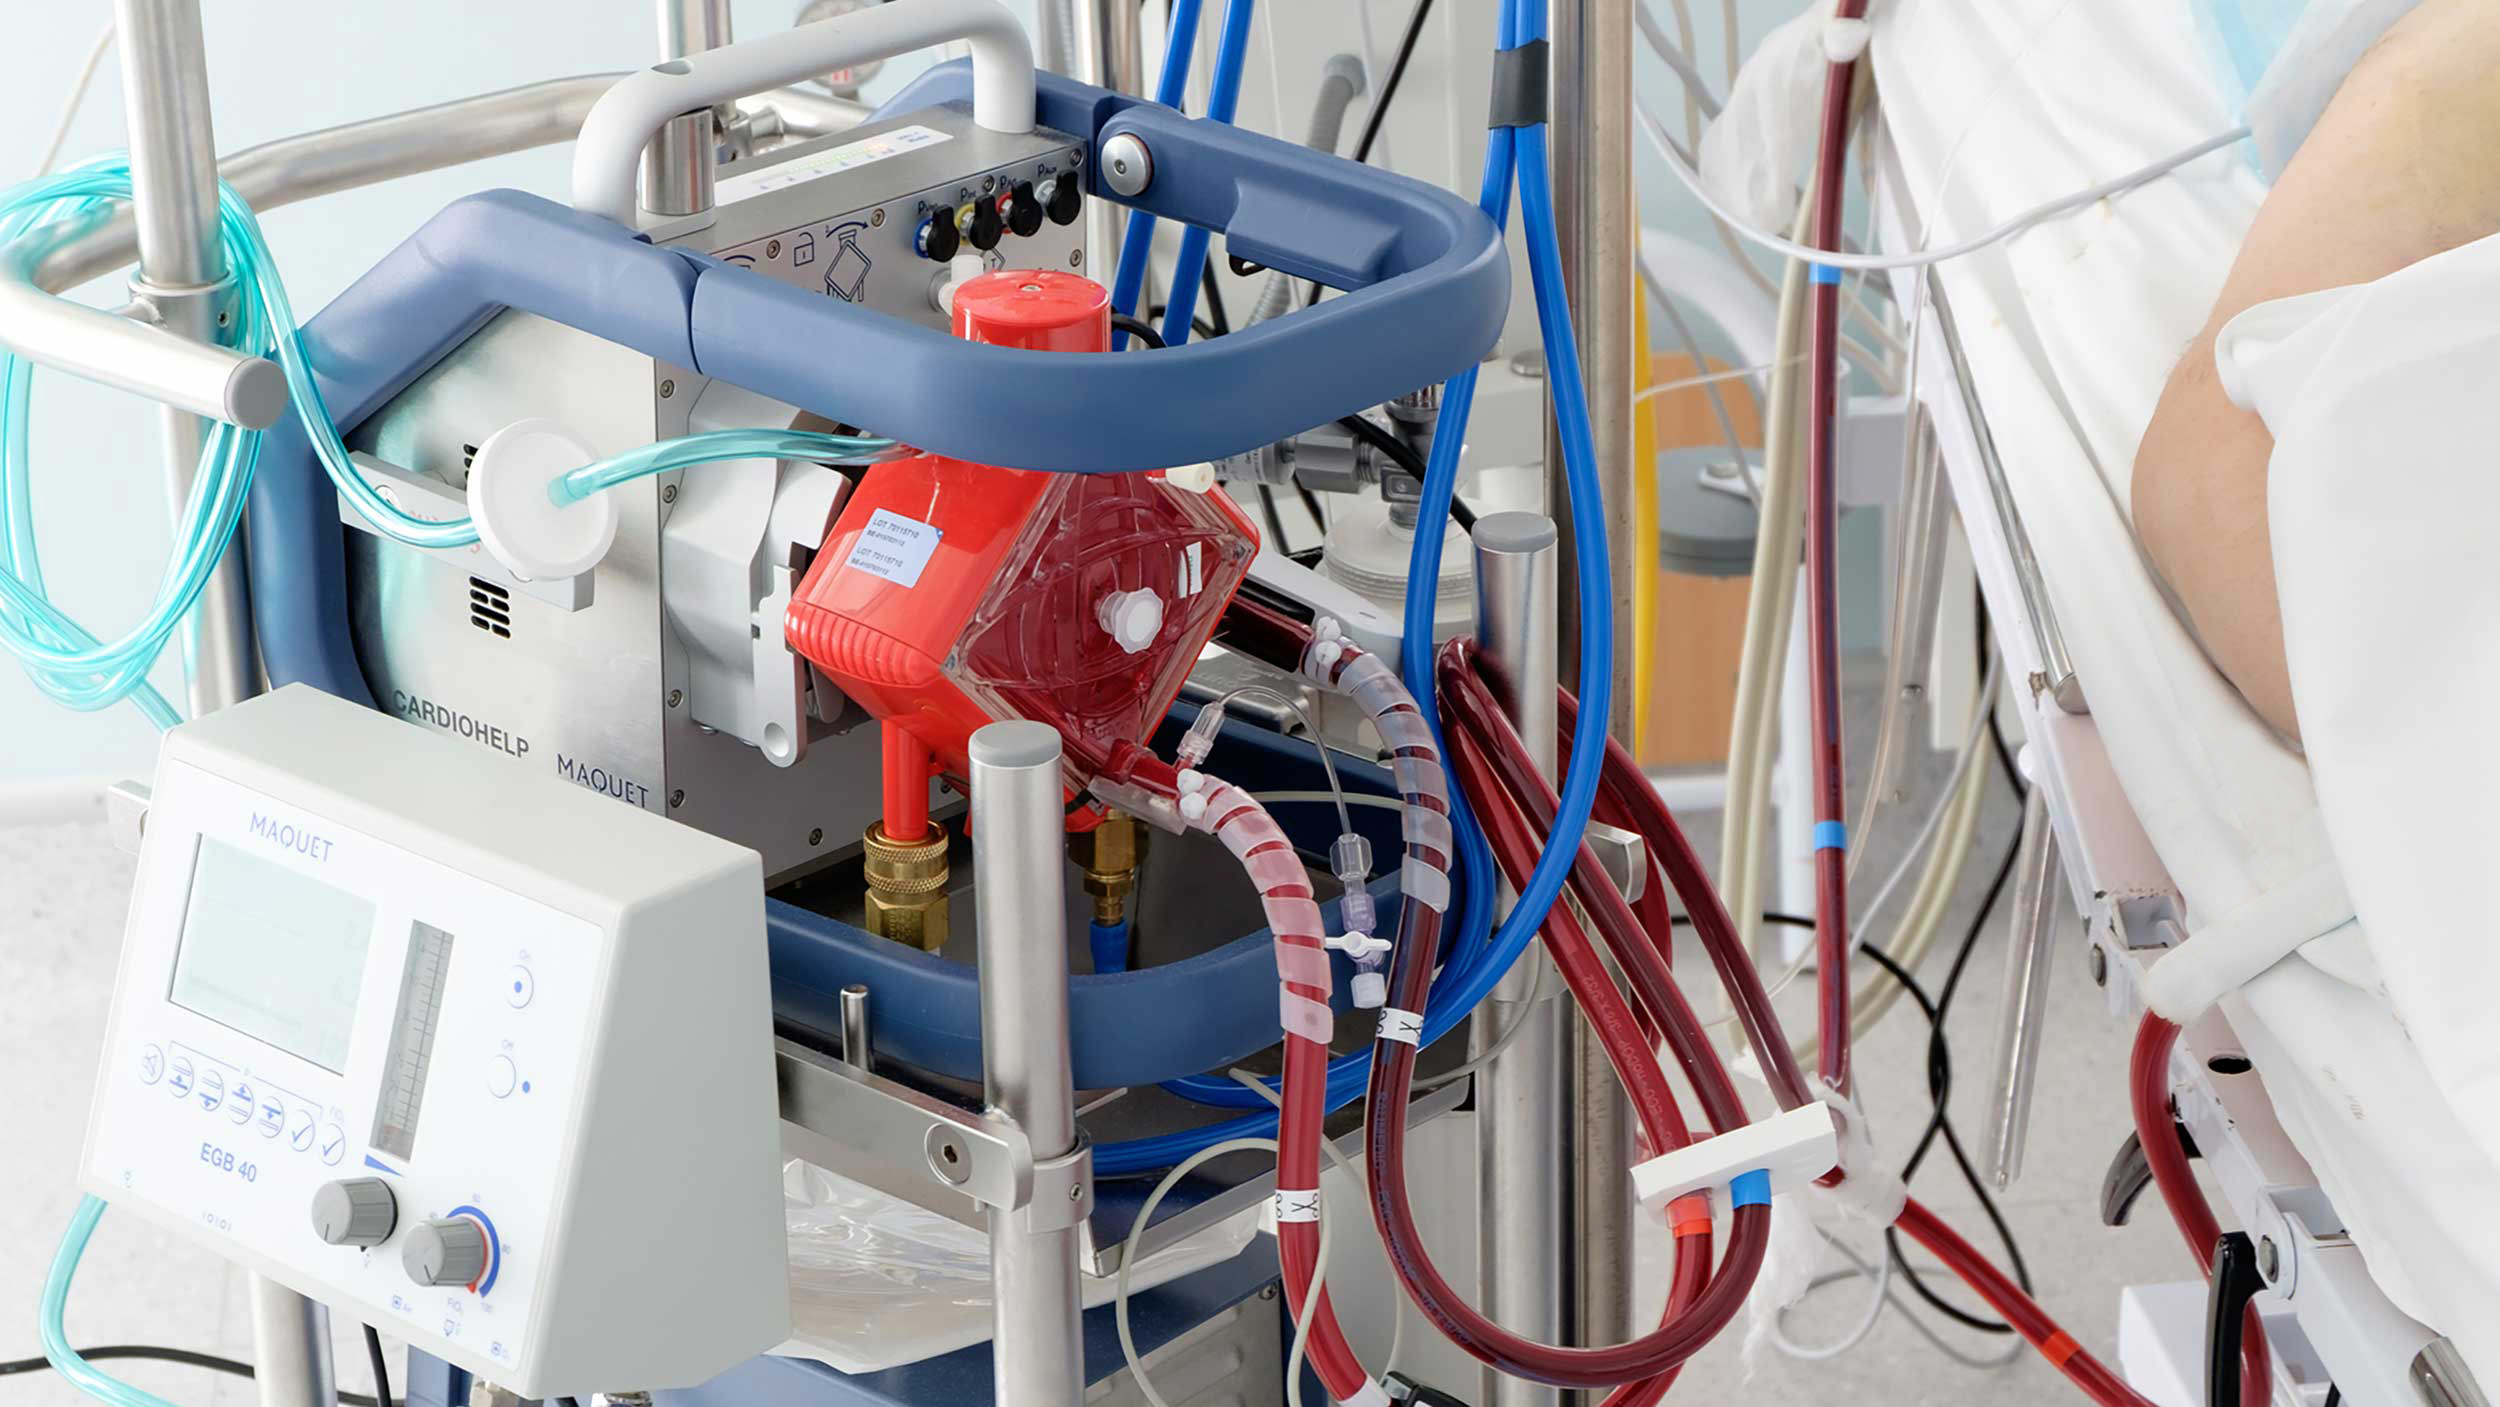 stock image of medical equipement using extracorporeal membrane oxygenation, or ECMO technology